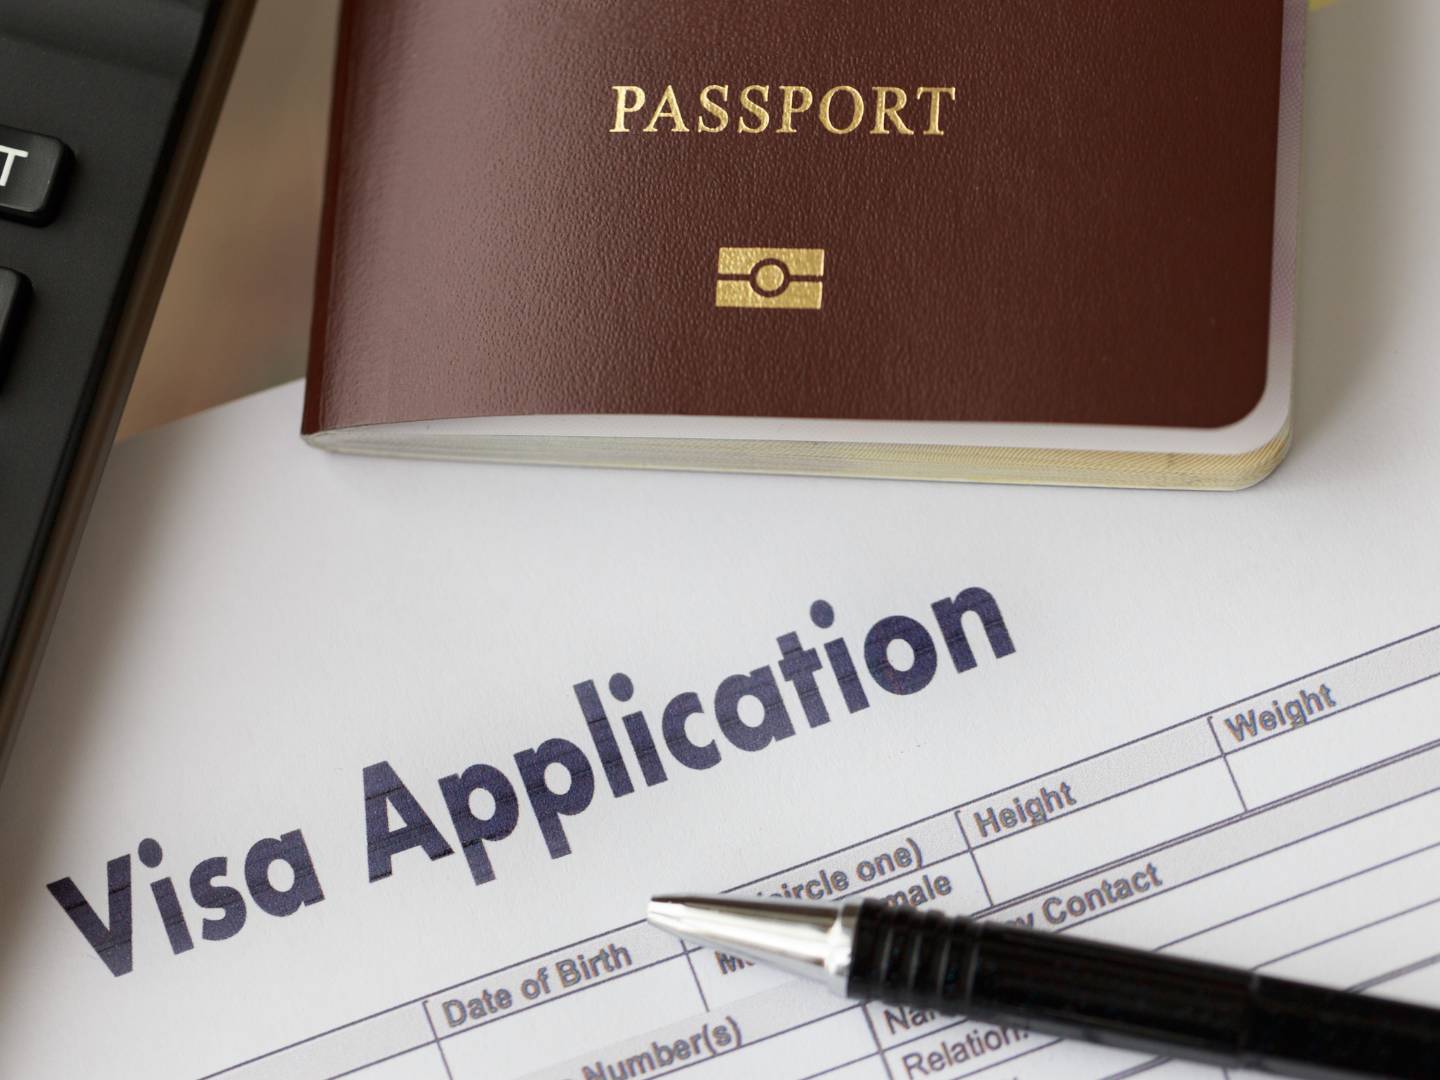 Visa application form to travel Immigration a document
